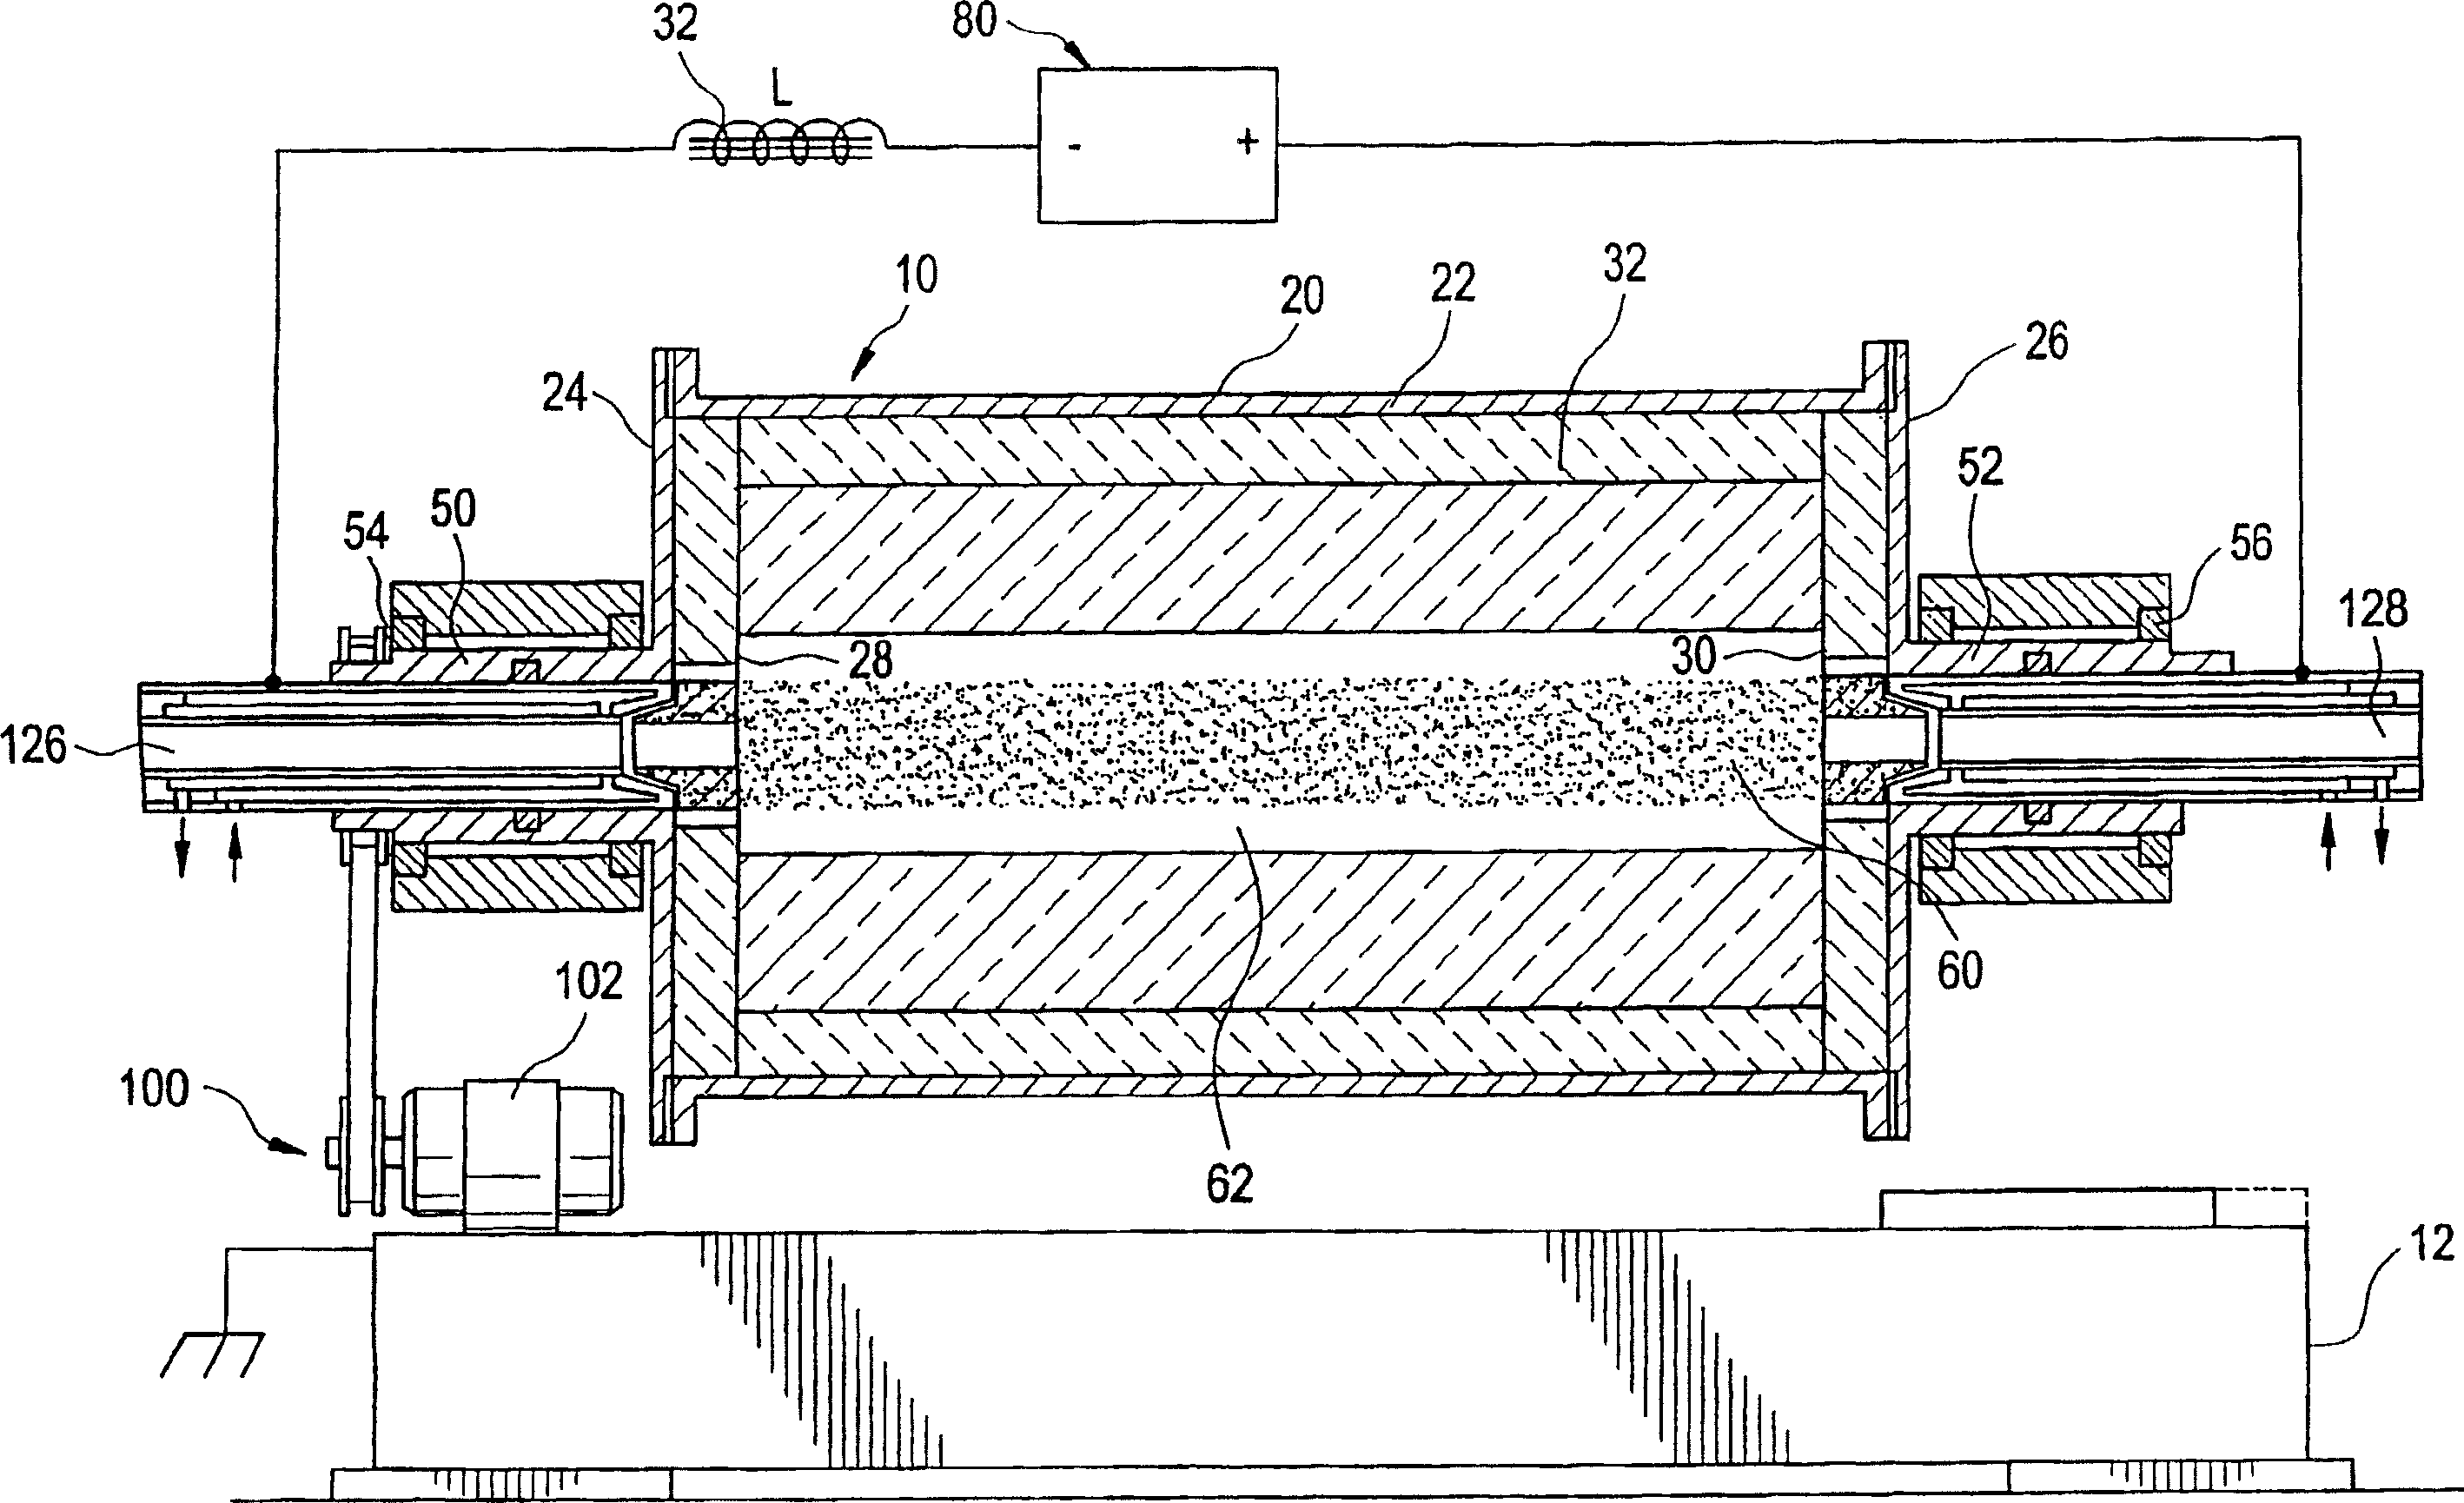 Fabrication of heavy walled silica tubing